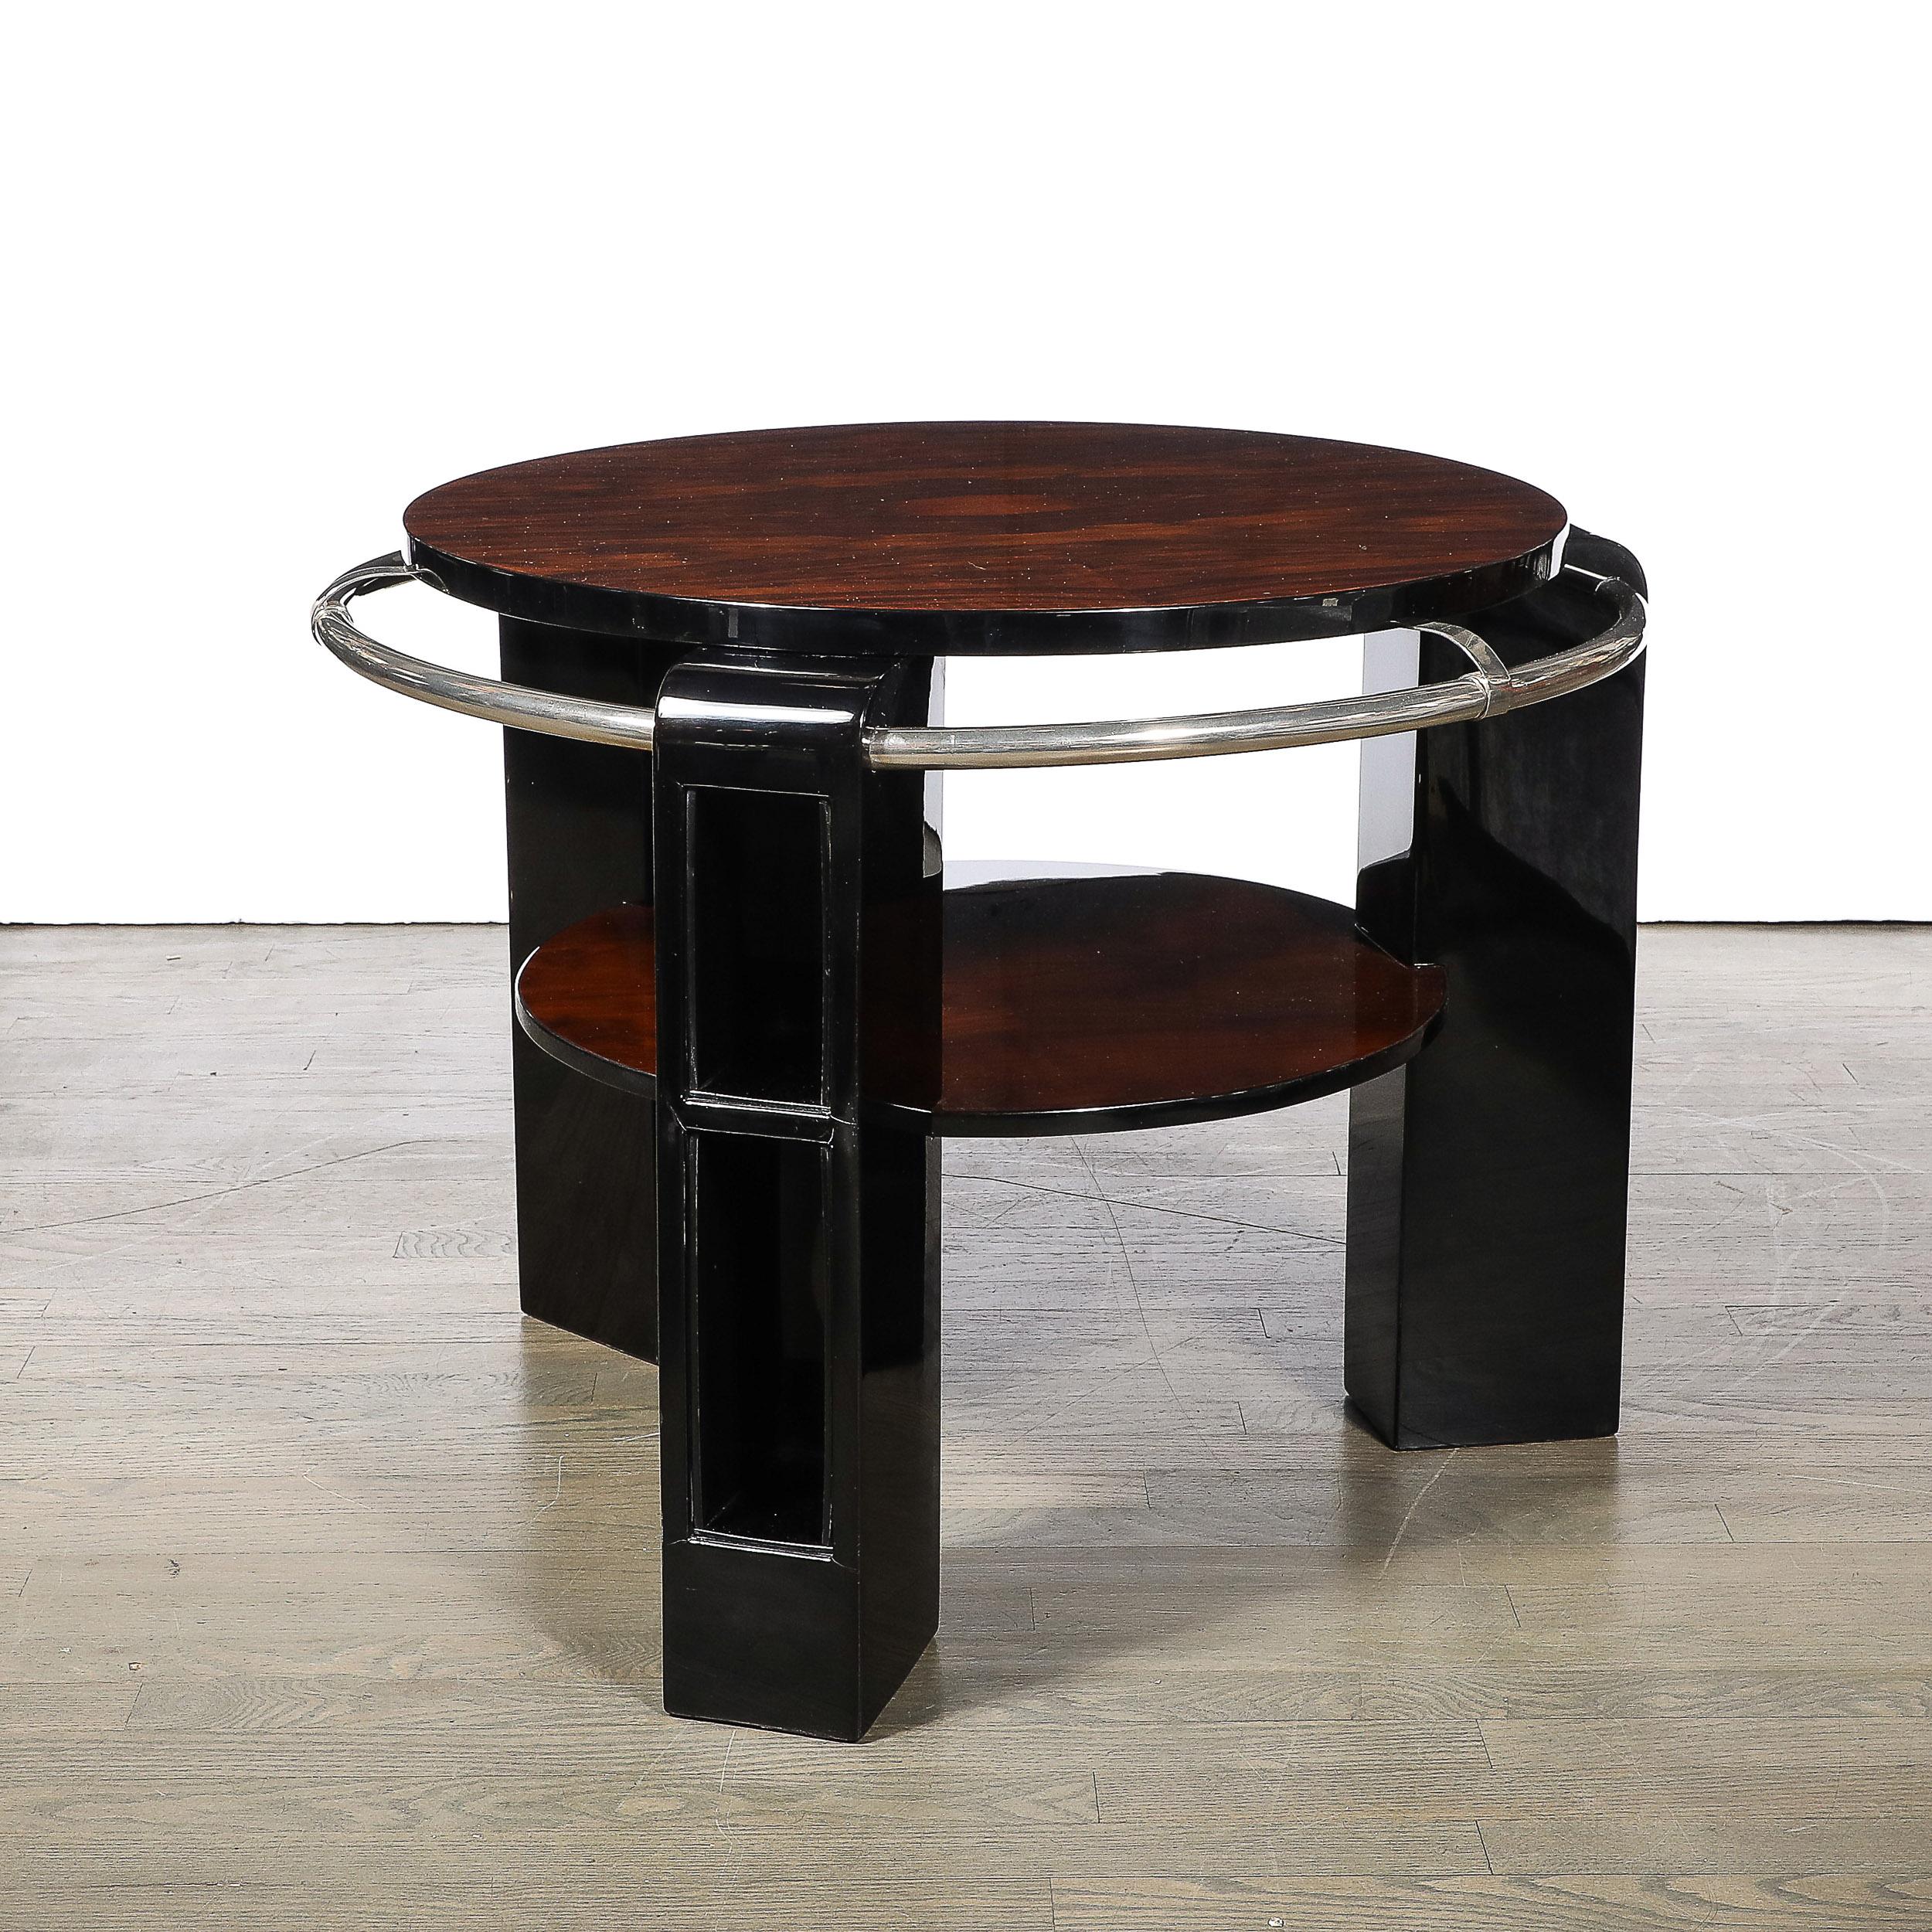 Art Deco Two-Tier Book-Matched Walnut & Black Lacquer Occasional Table w/ Chrome In Excellent Condition For Sale In New York, NY